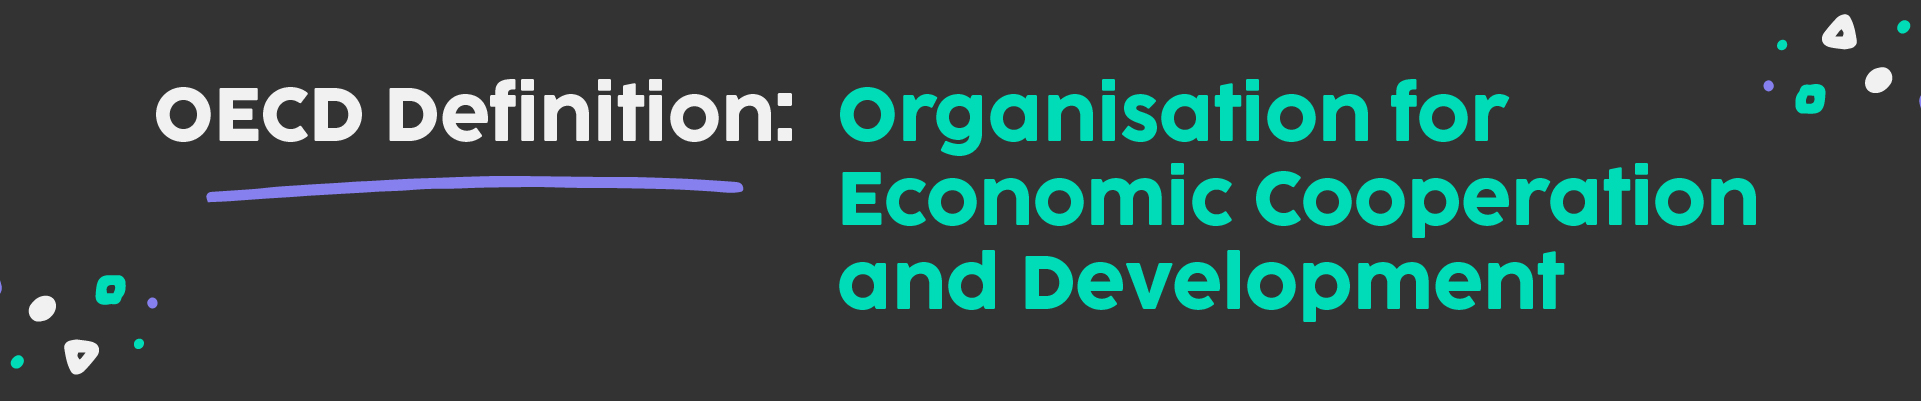 OECD Definition: Organisation for Economic Cooperation and Development